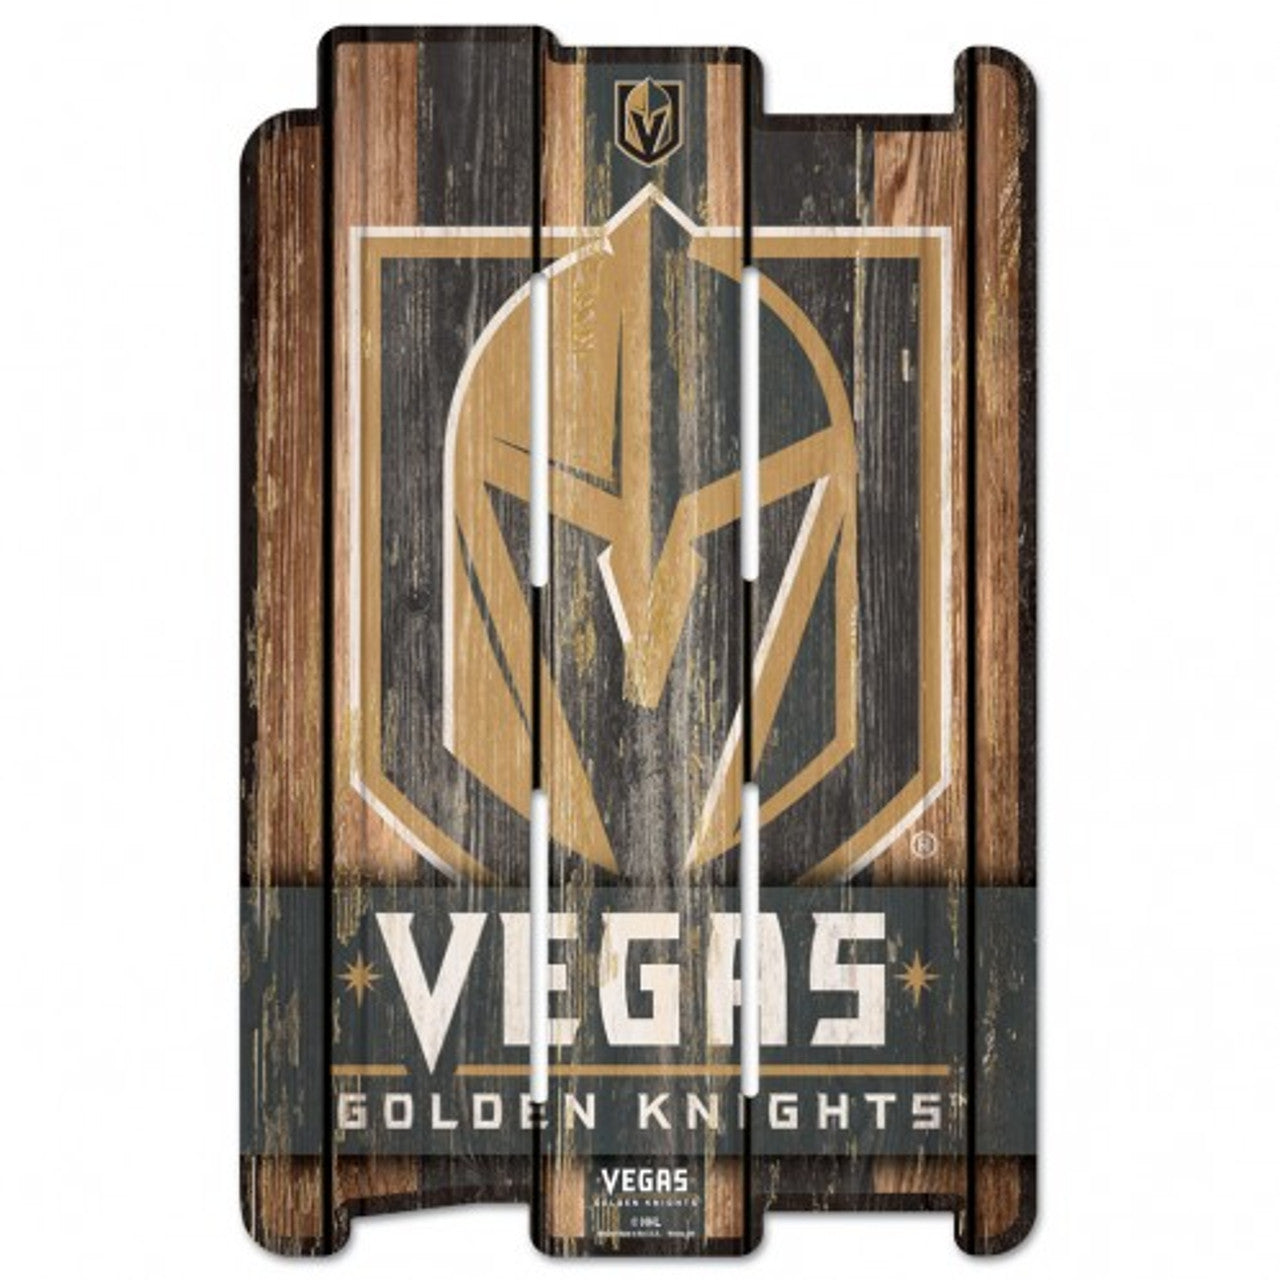 Vegas Golden Knights 11" x 17" Wood Fence Sign by Wincraft